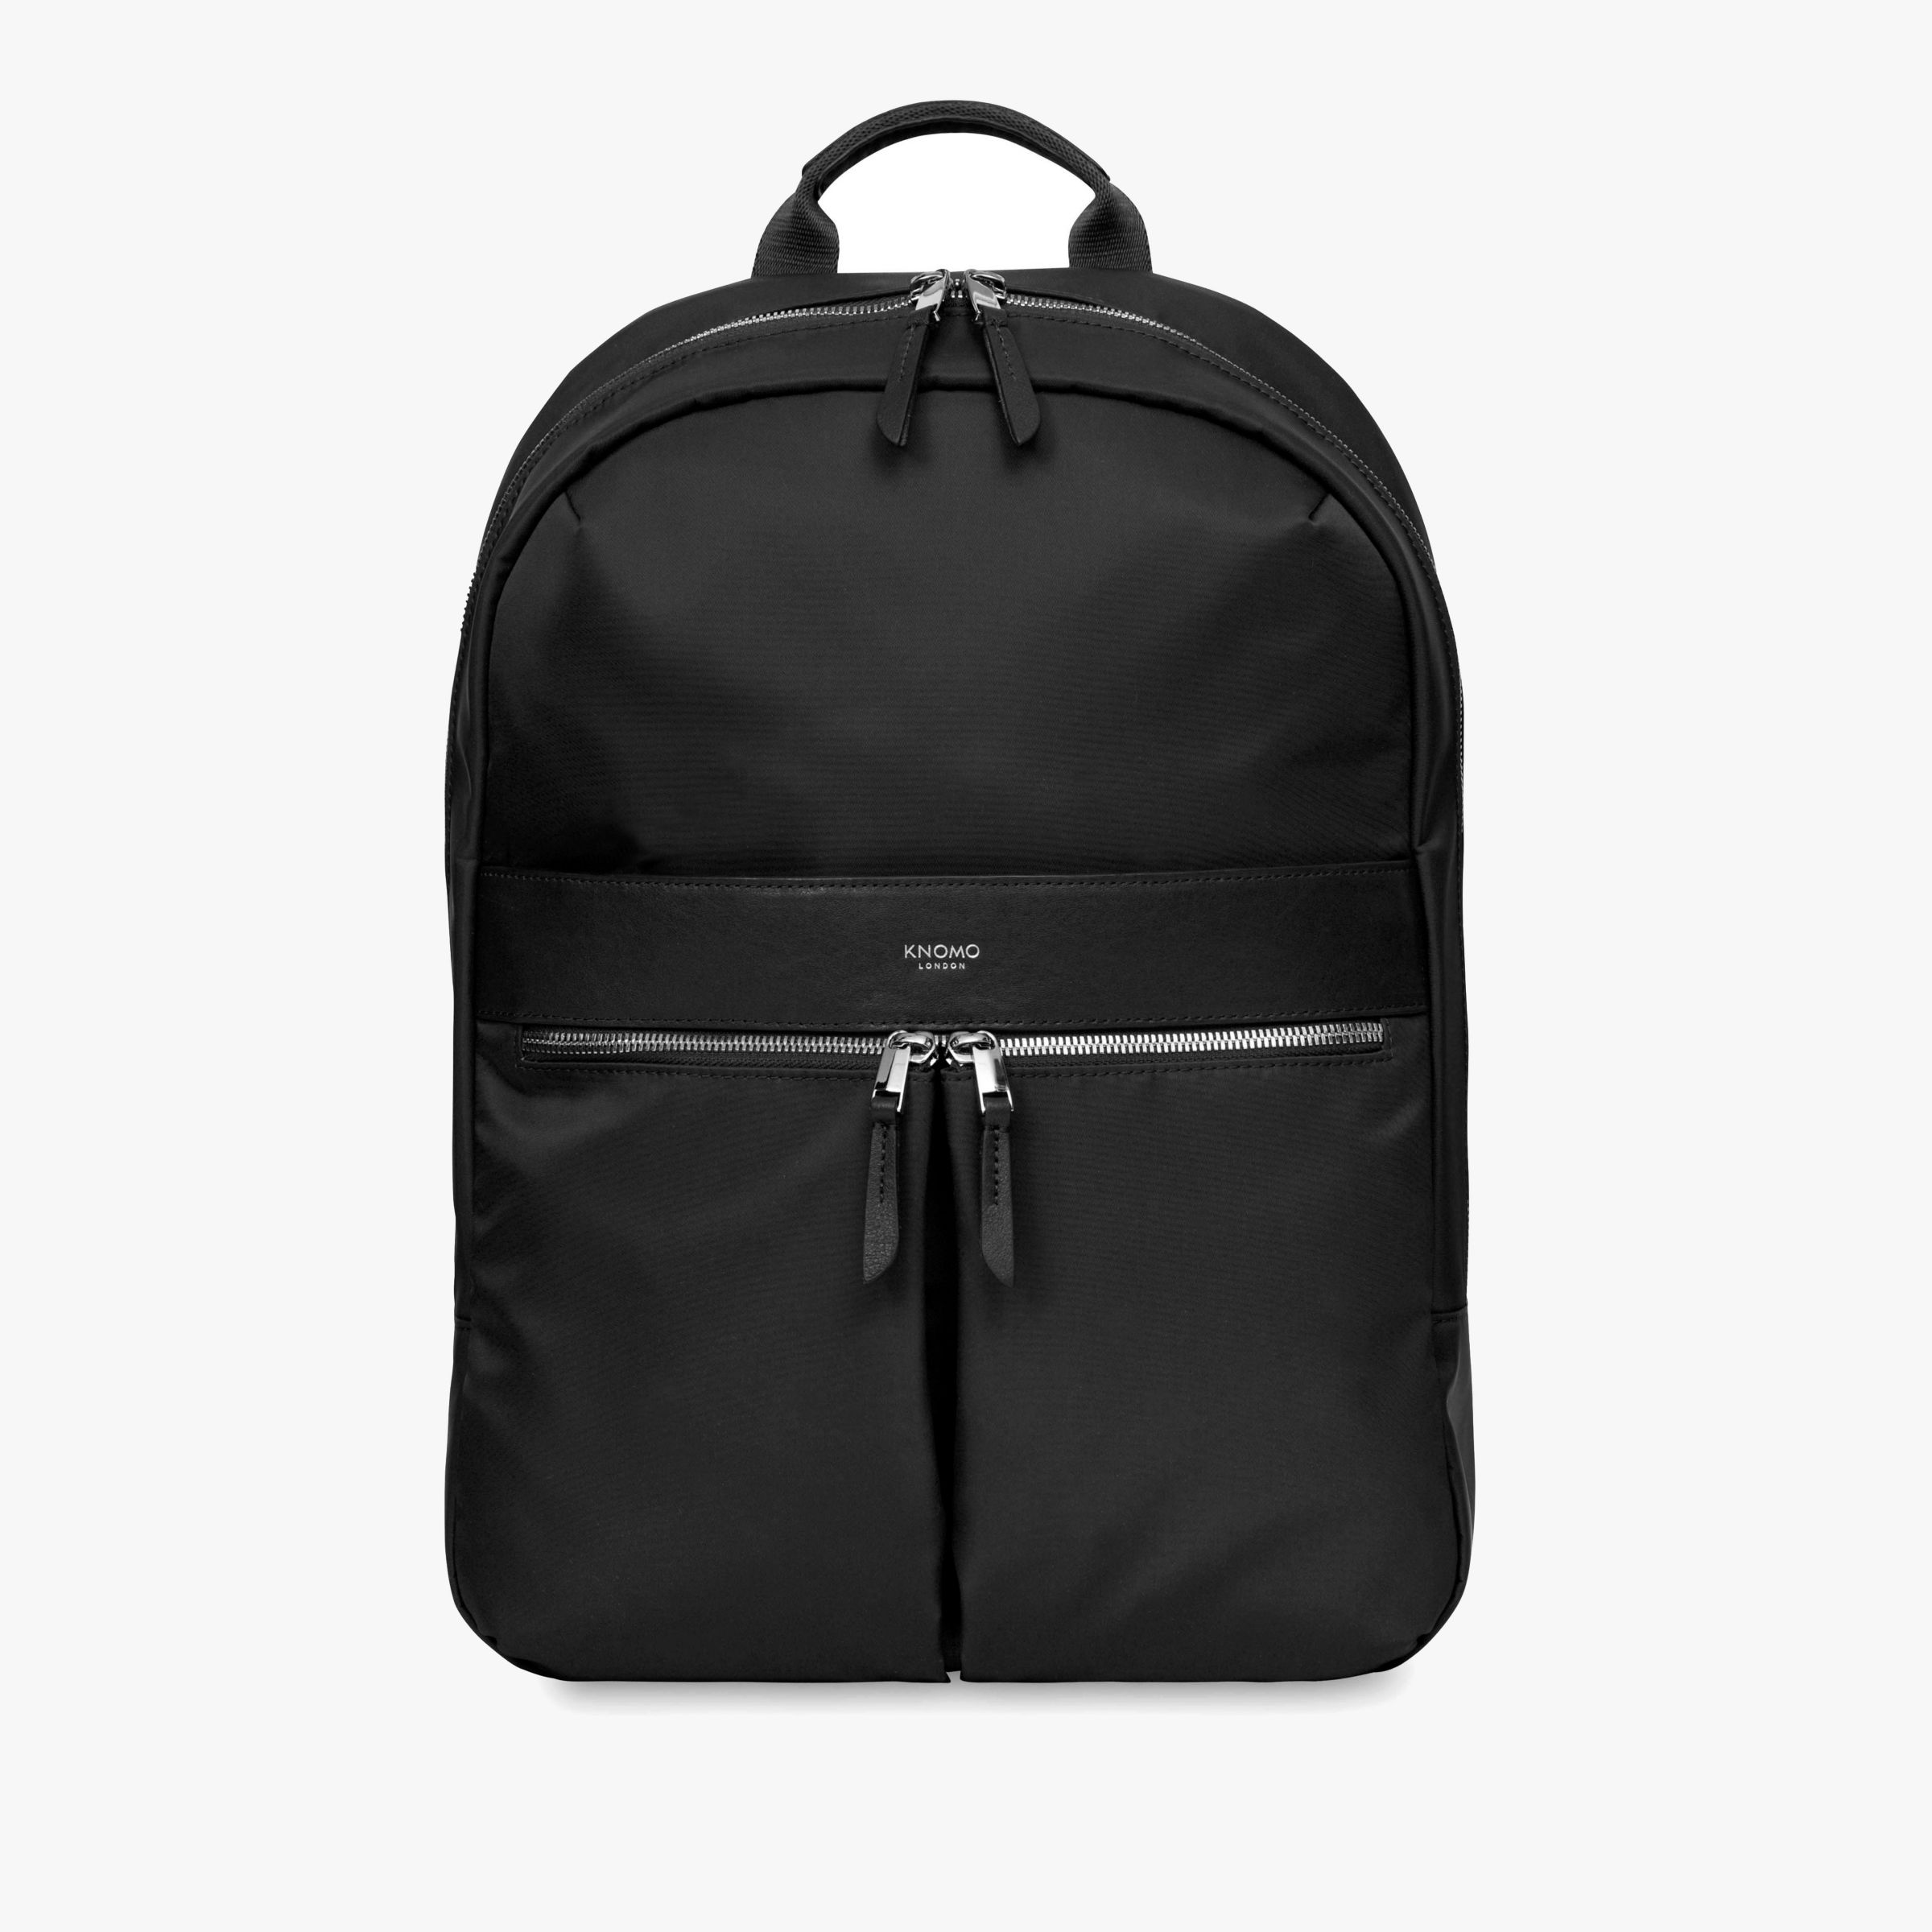 laptop bags and cases